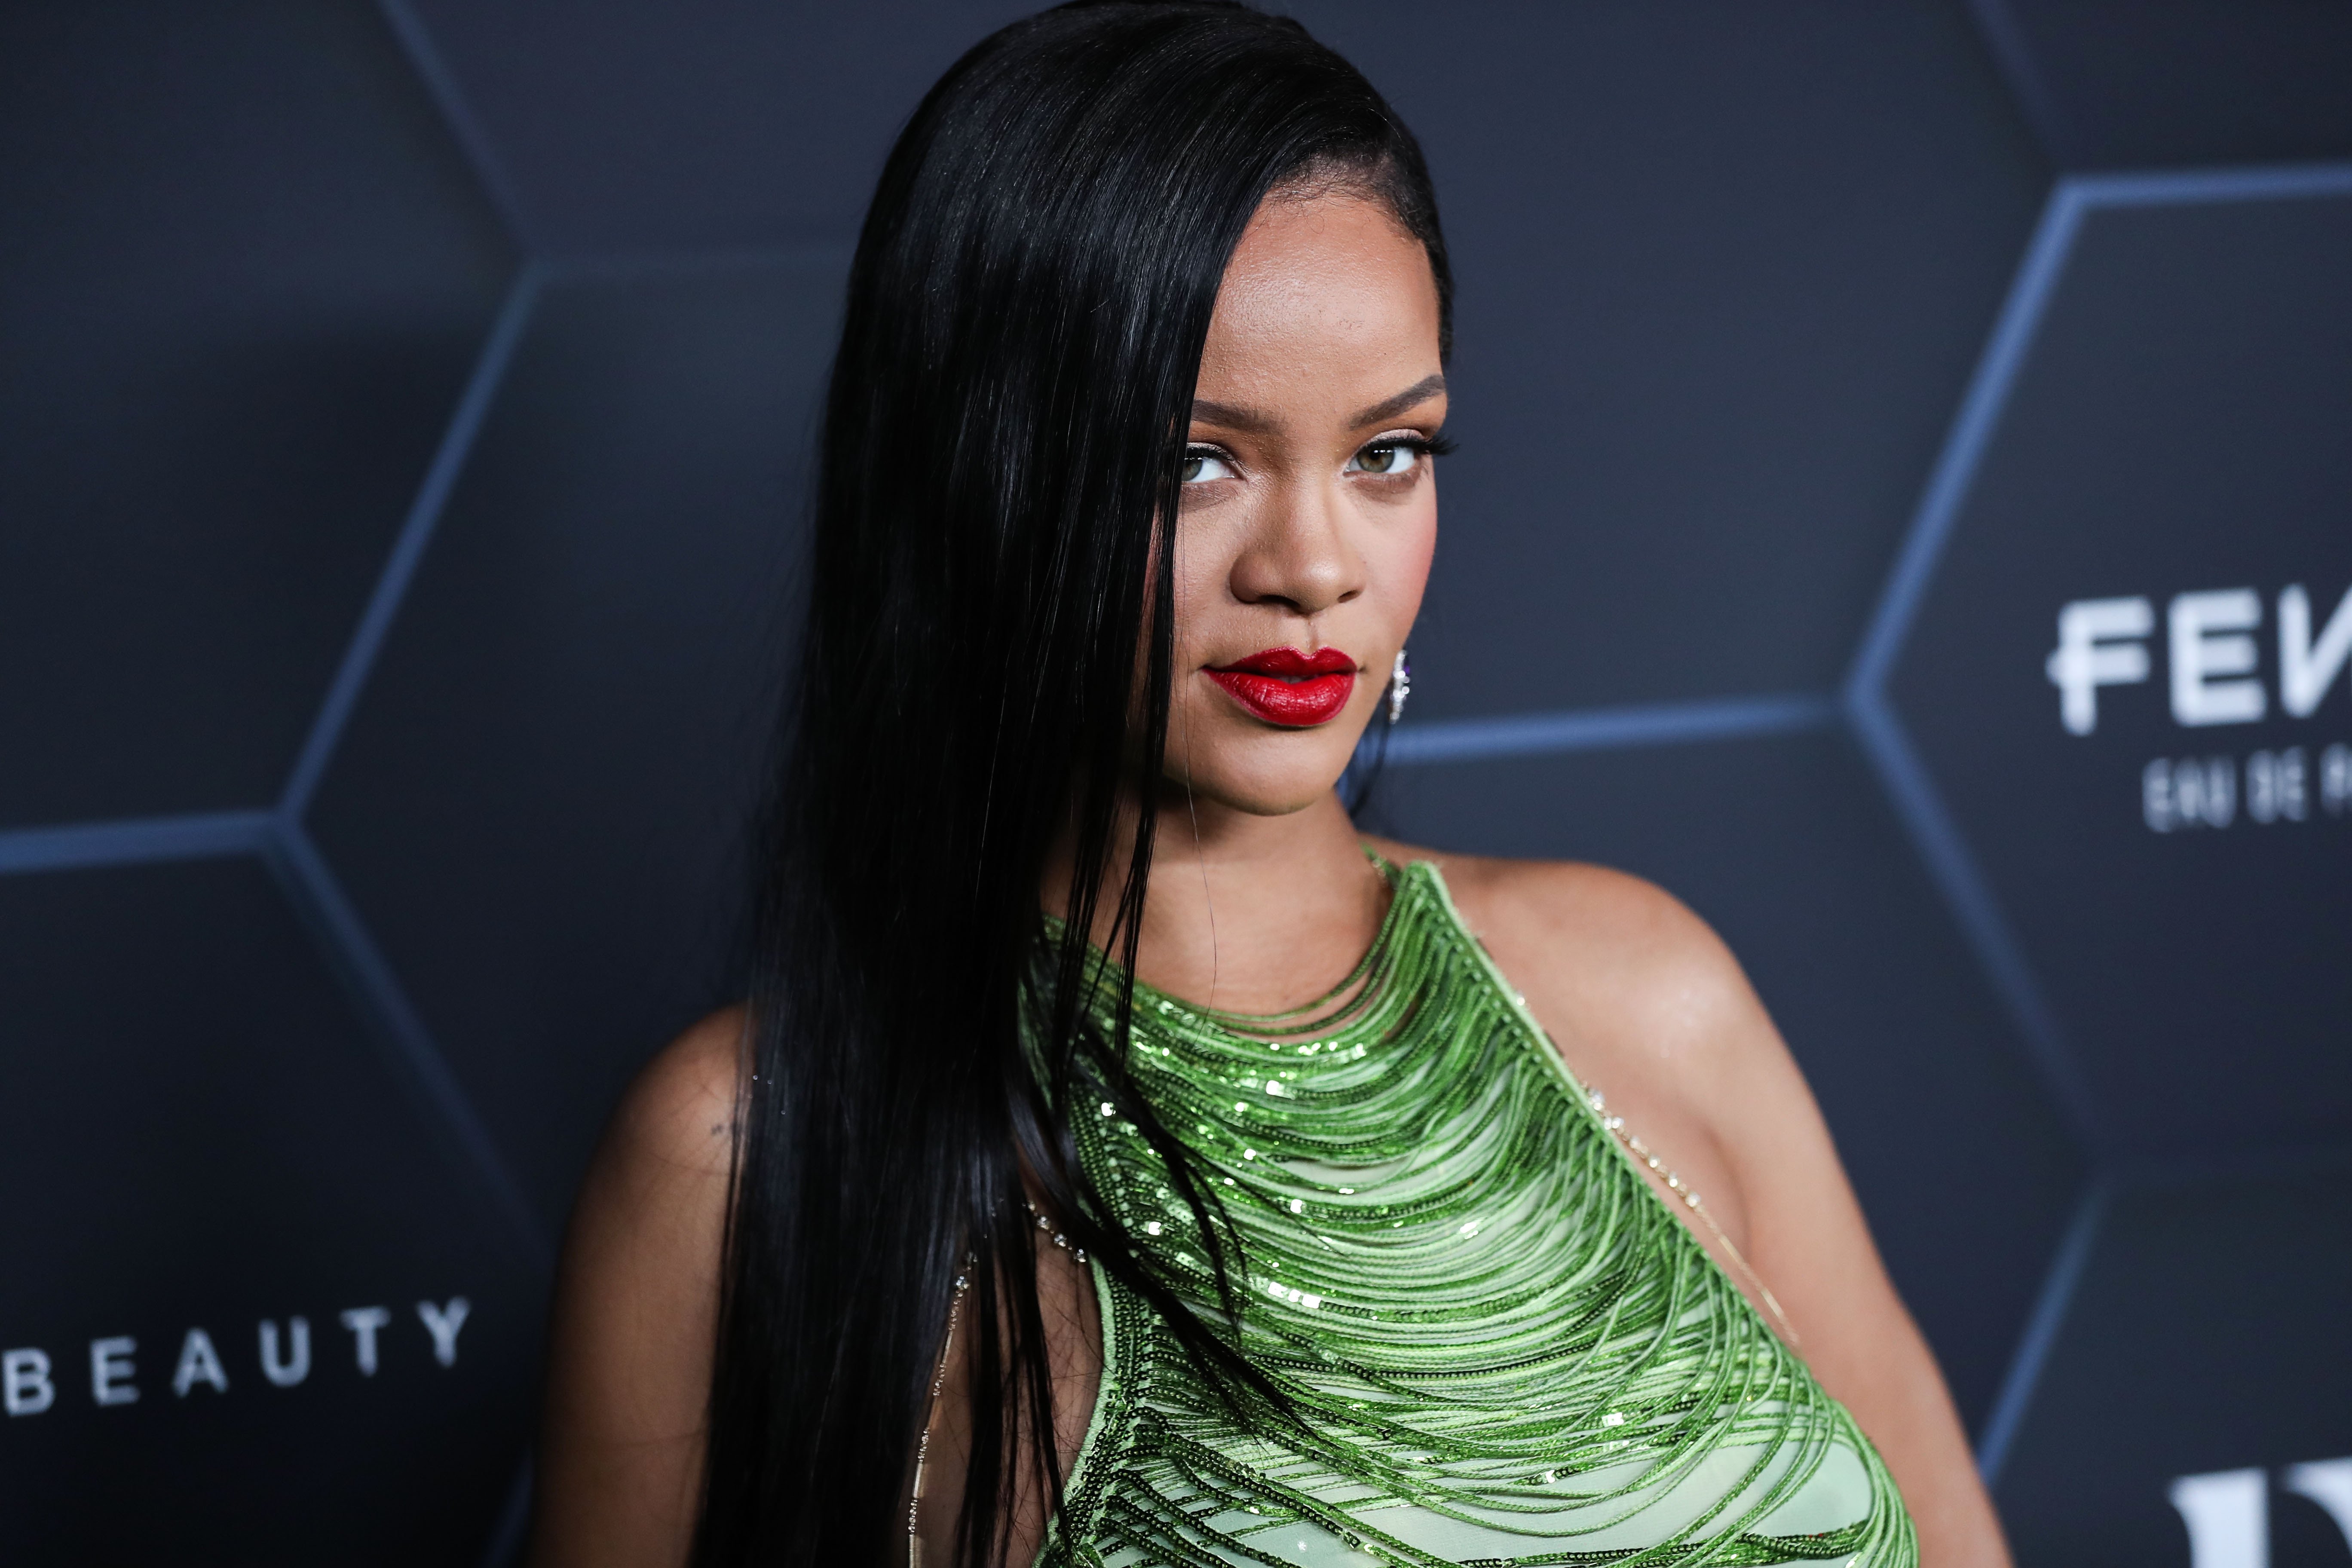 Why Rihanna's Fenty Fashion Line with LVMH Didn't Work Out